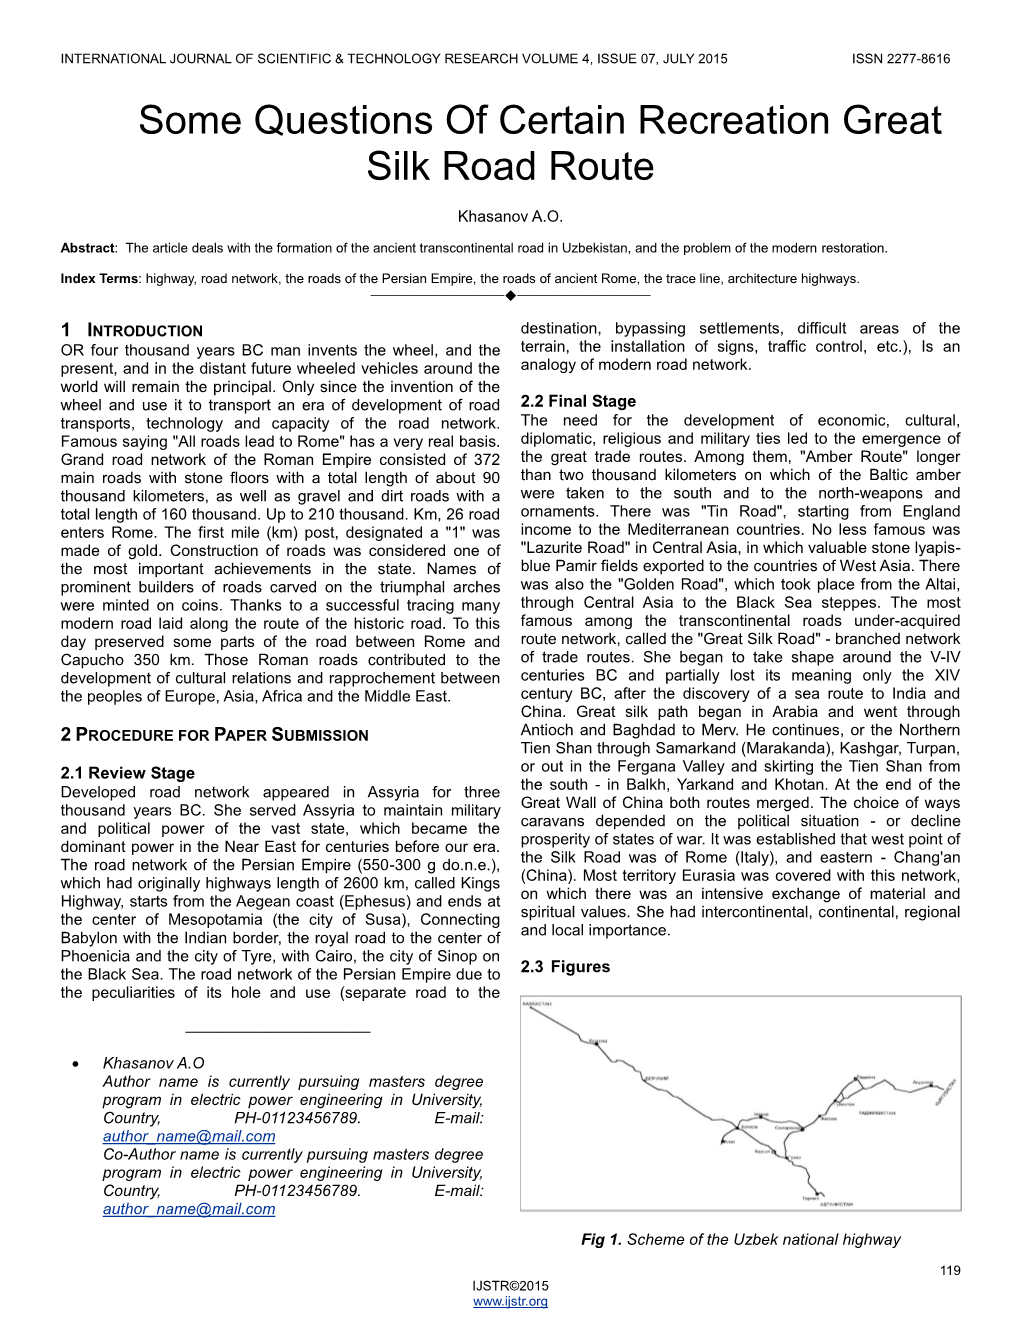 Some Questions of Certain Recreation Great Silk Road Route